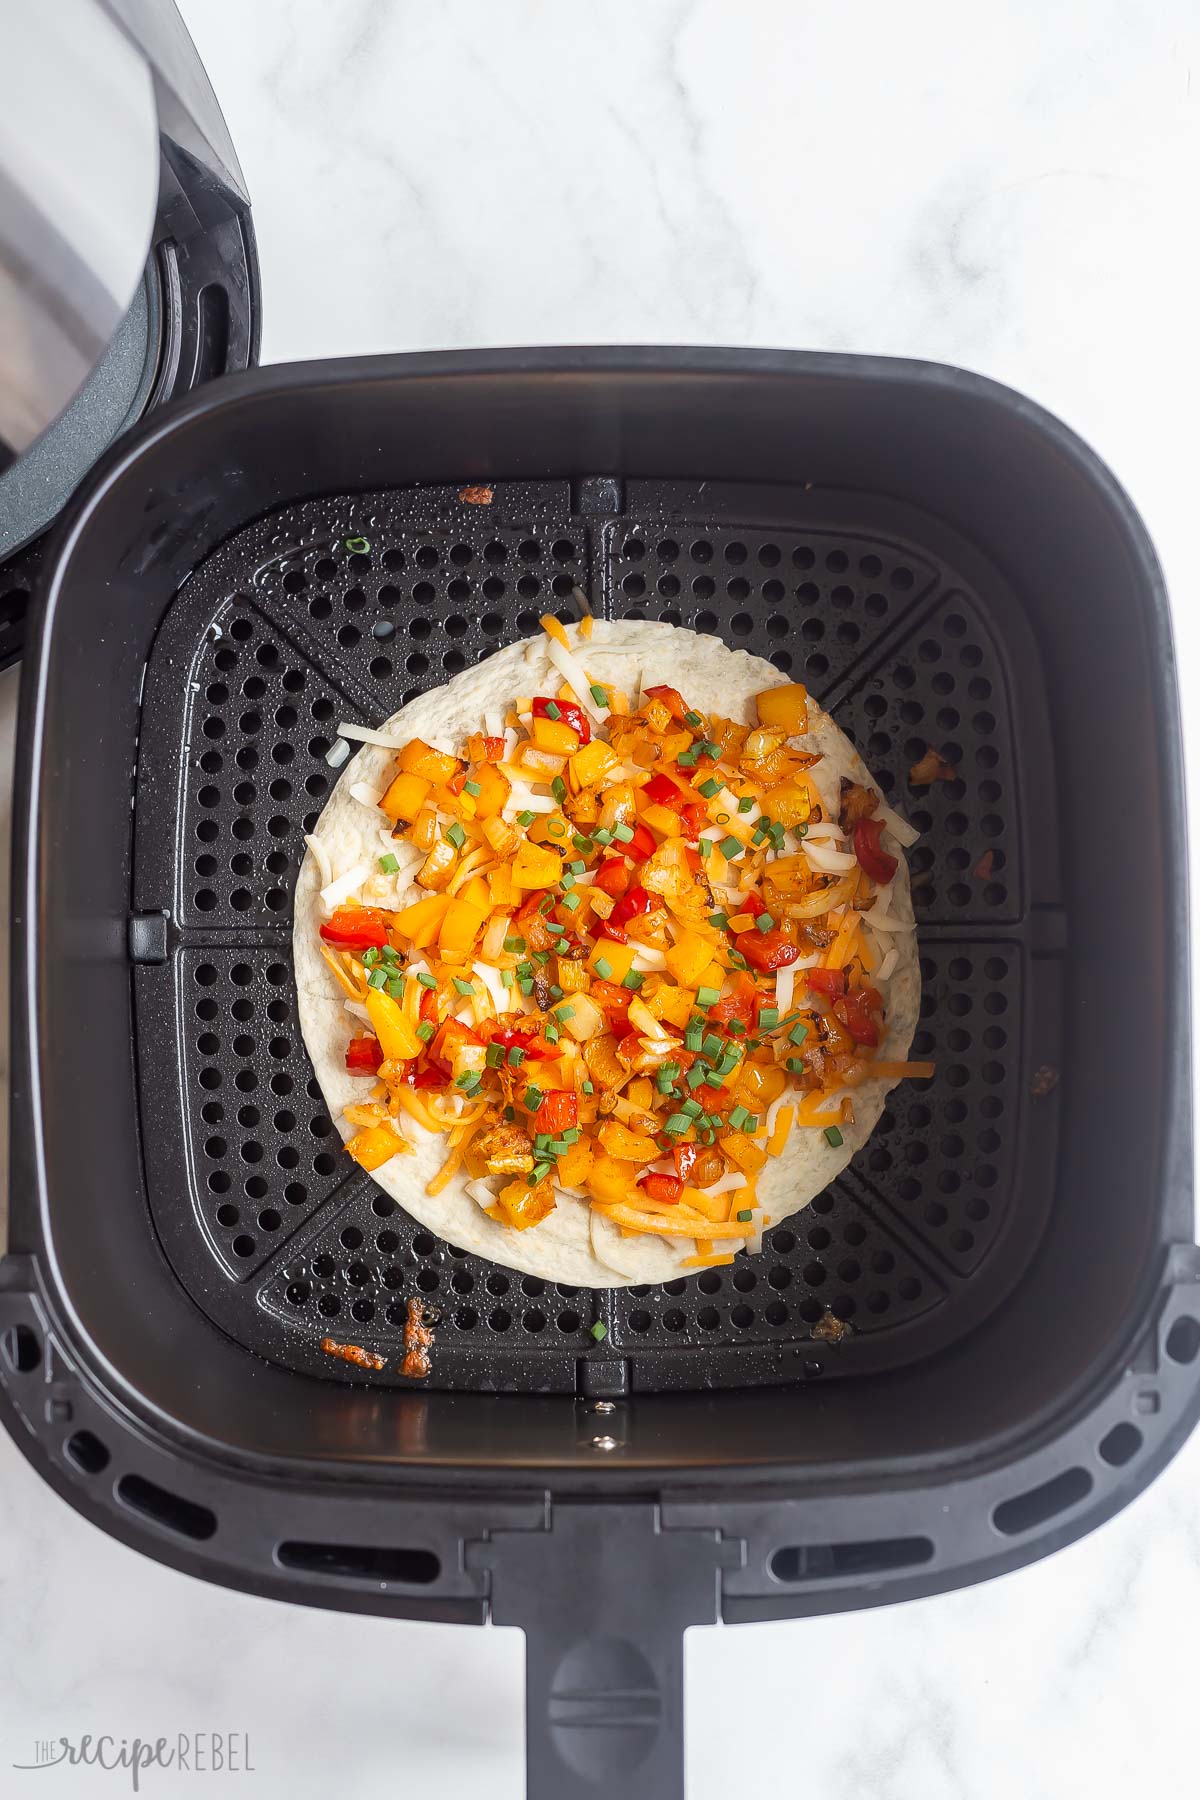 Top view of tortilla with toppings on it in air fryer basket.